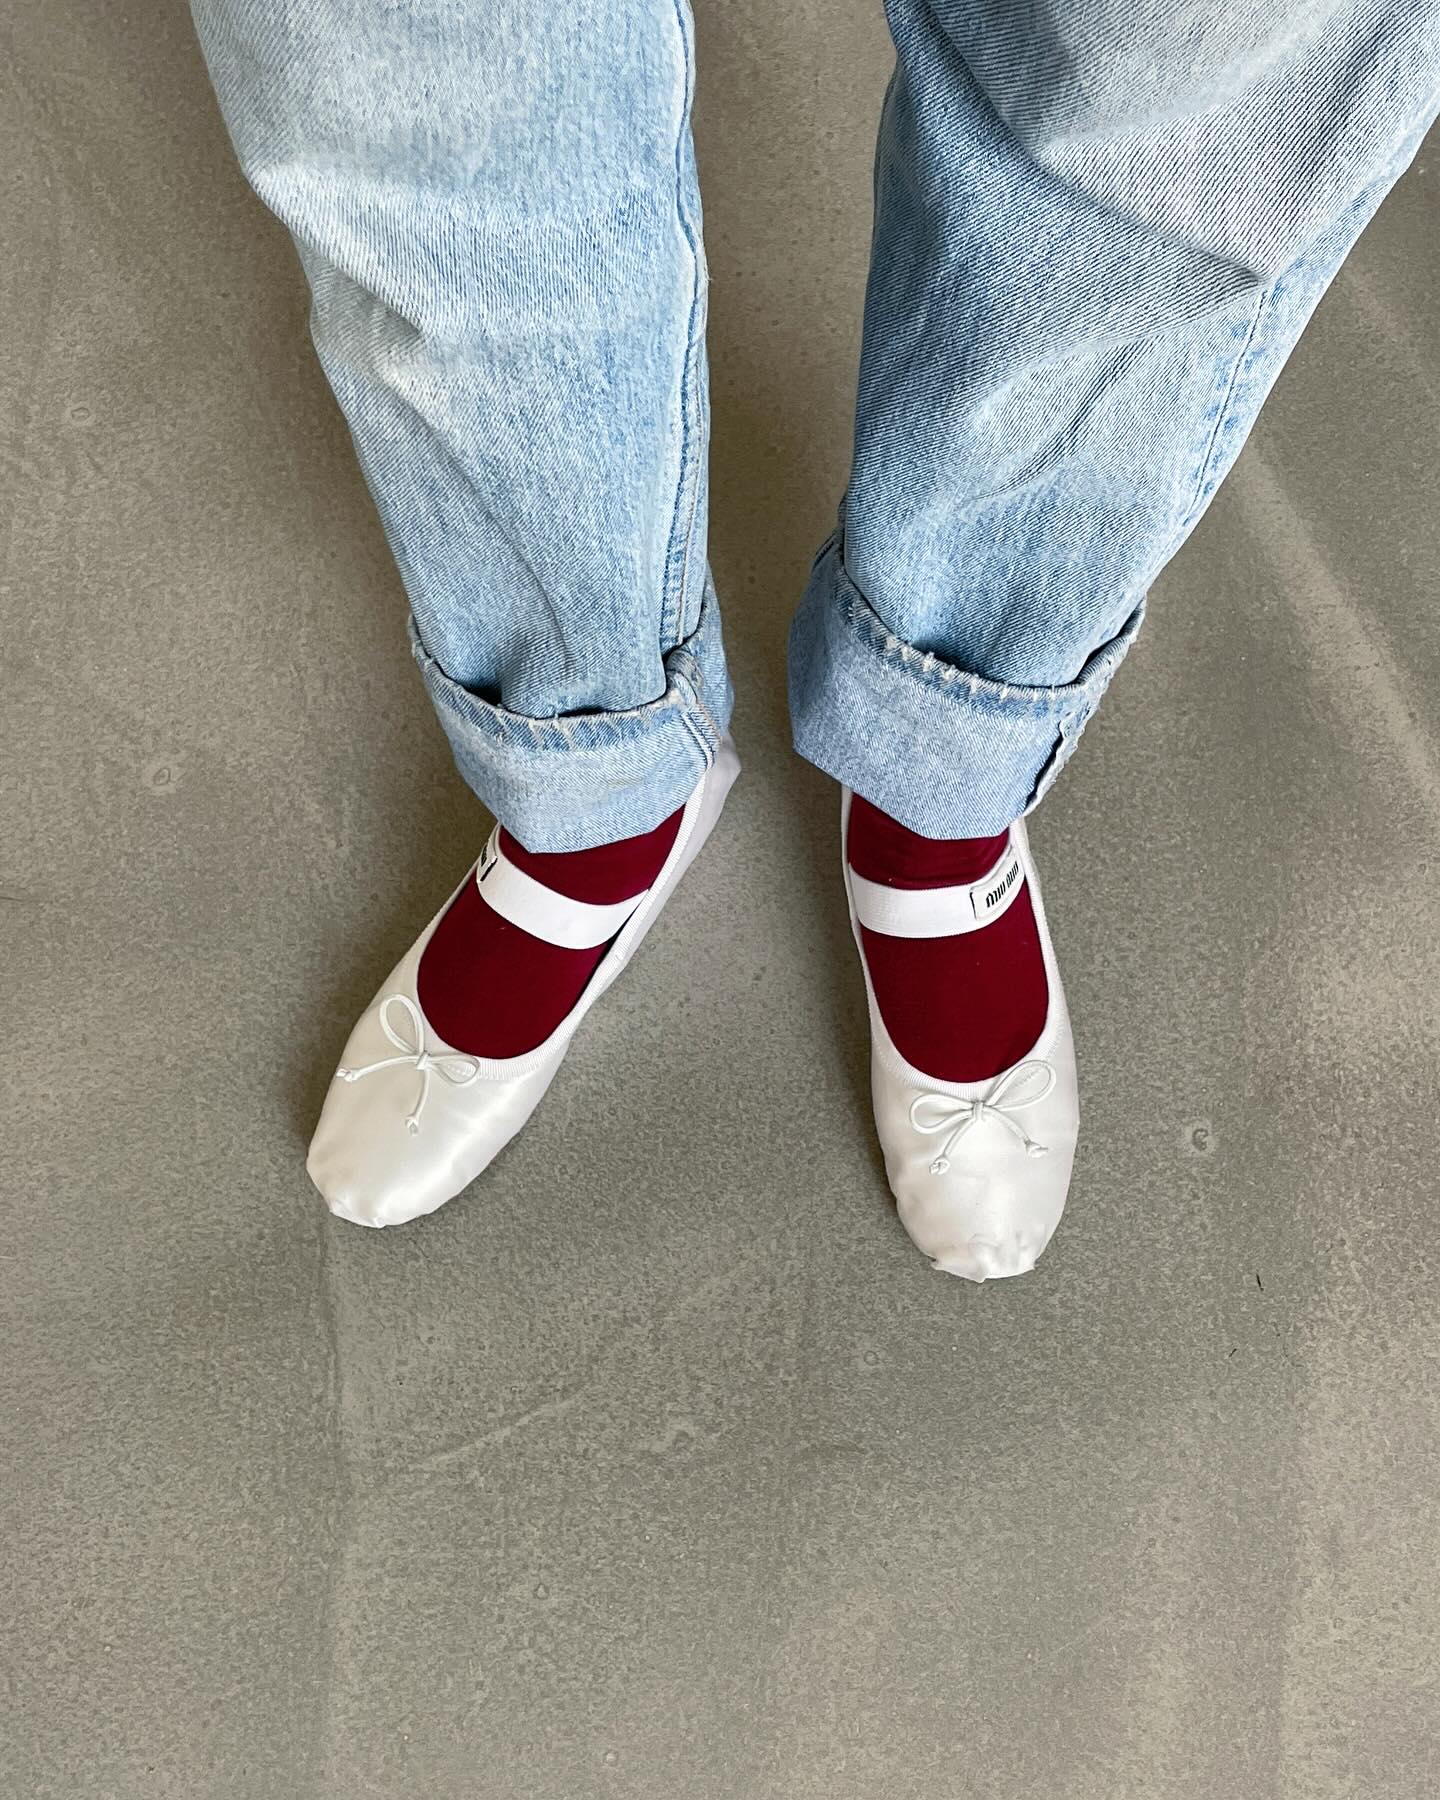 French influencer Anne-Laure Mais wears light-wash cuffed jeans, burgundy red socks, and white Miu Miu ballet flats